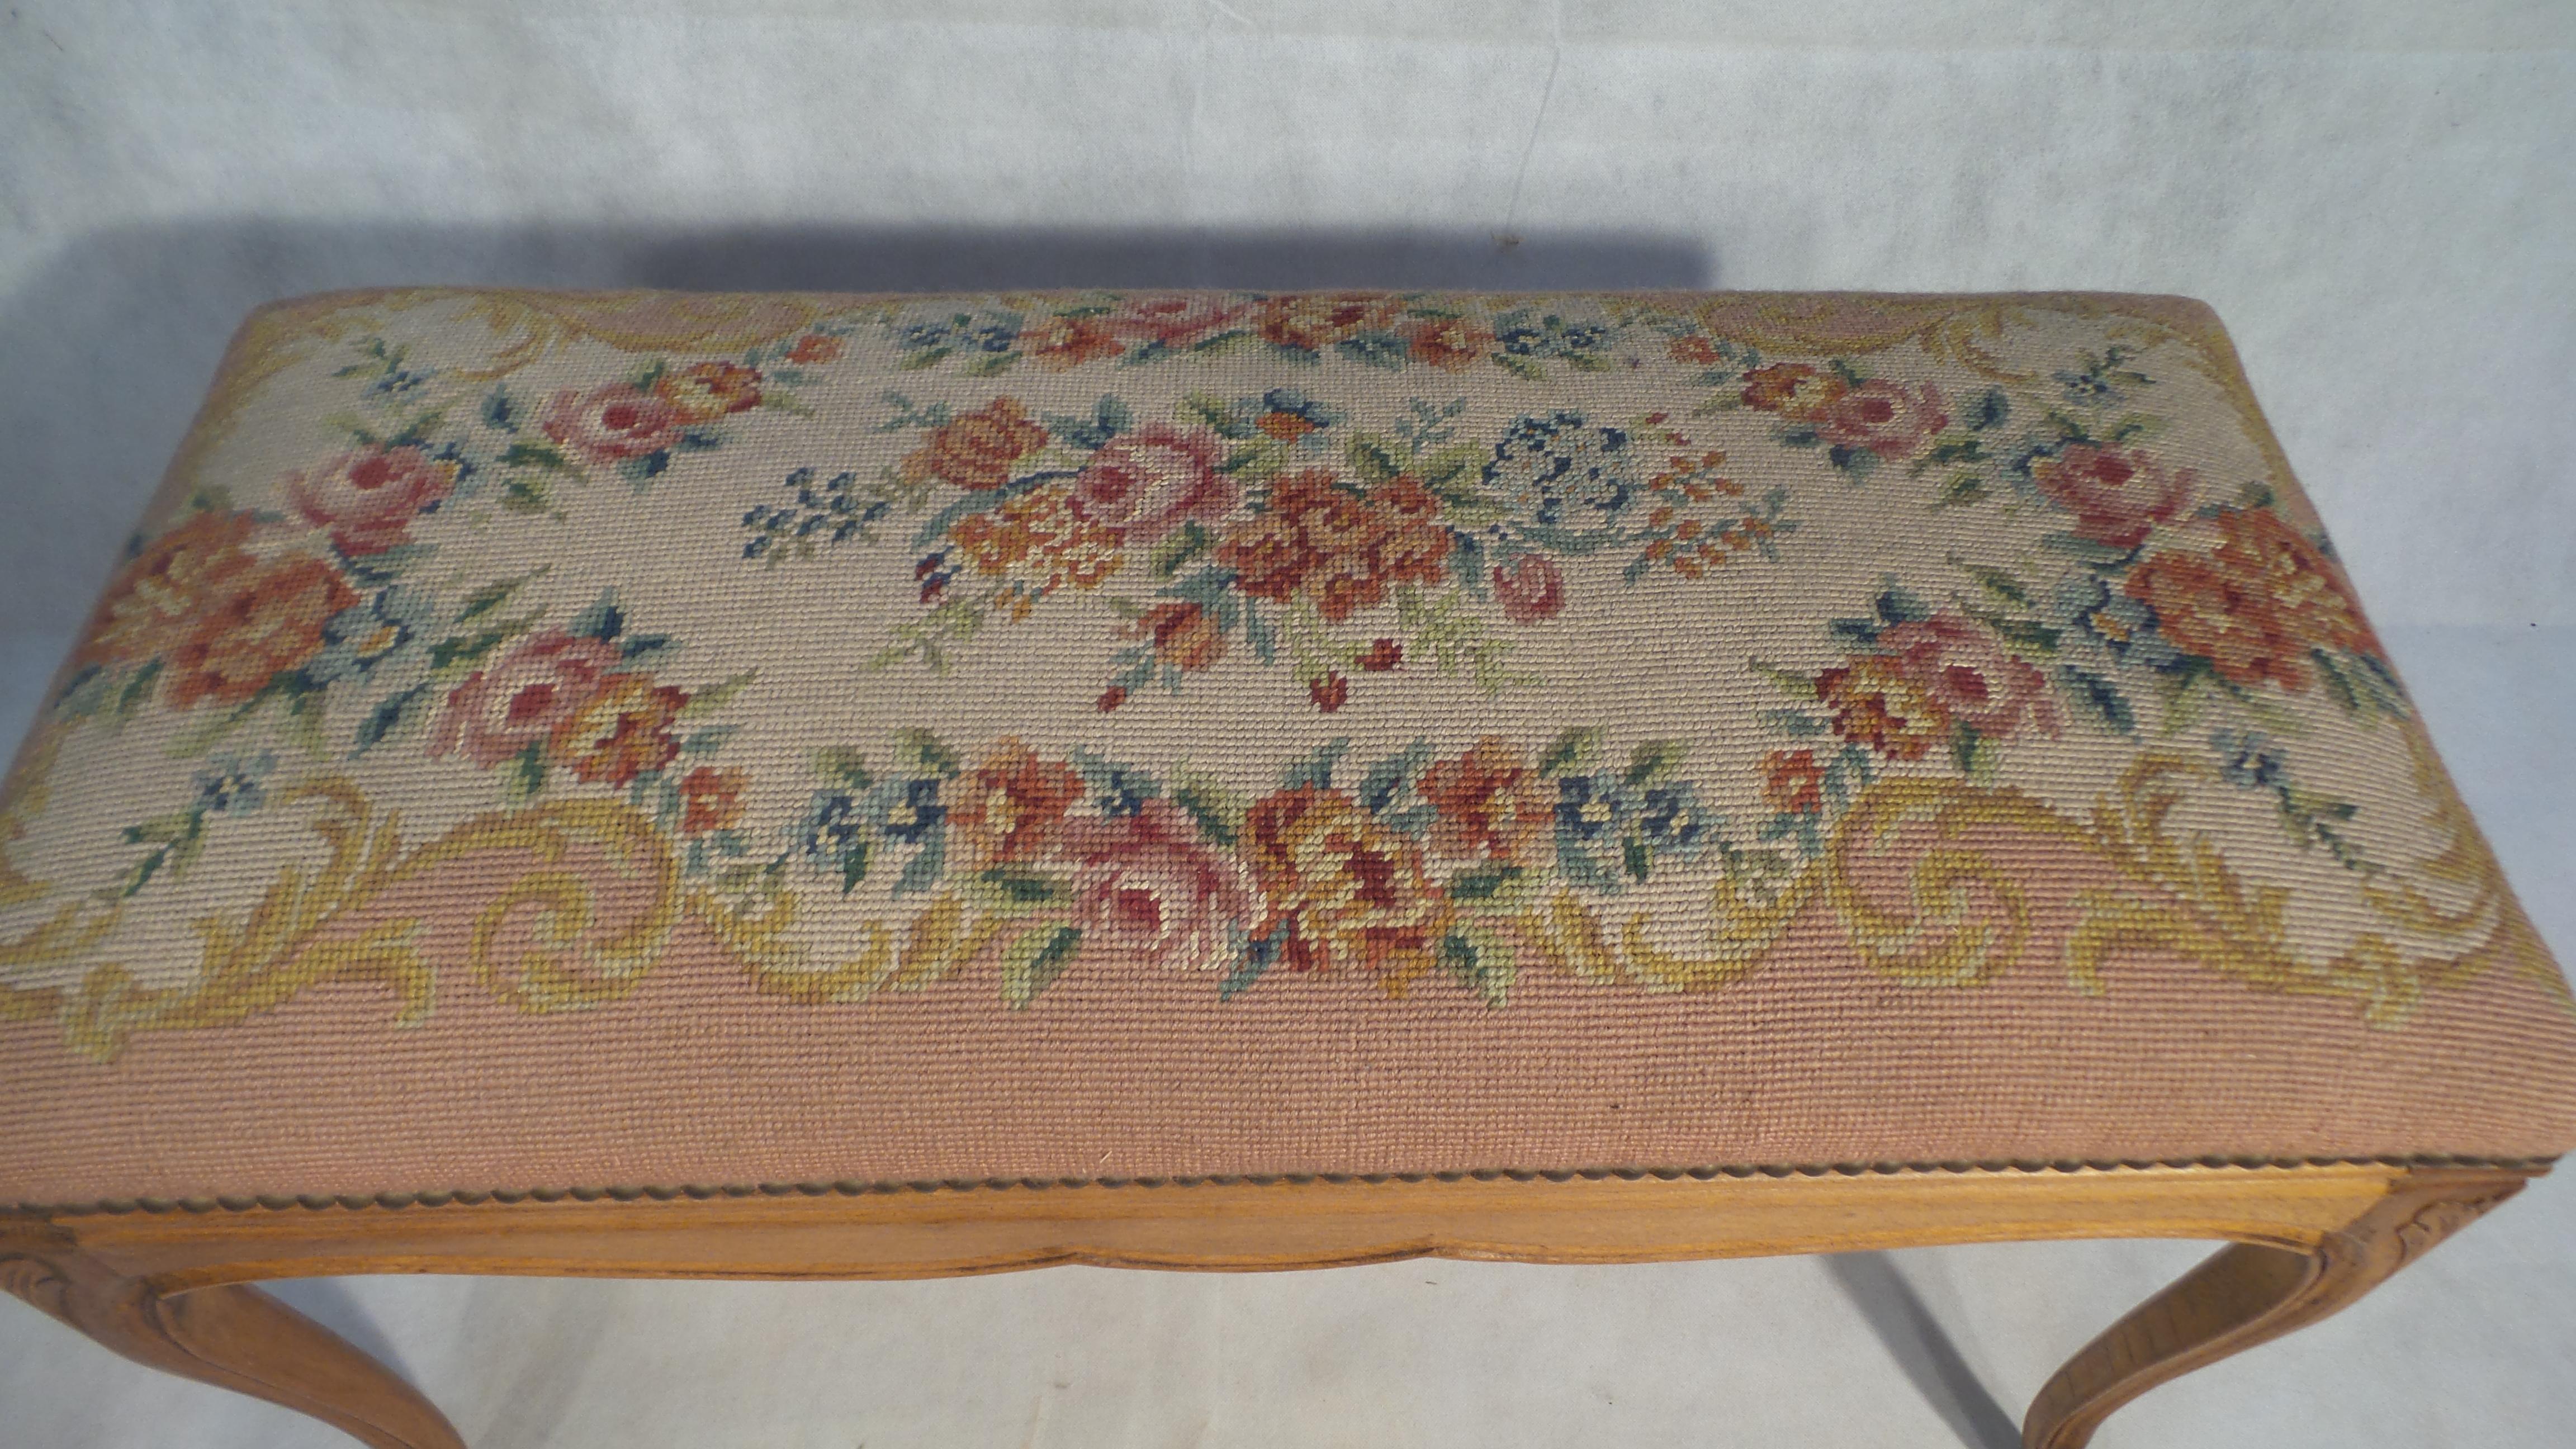 An outstanding example of this timeless example of French chic. This beautiful footstool has a tapestry seat with an elegant oak frame

The footstools background is in pale pink whilst the detailed tapestry design is in delicate pastels.
The